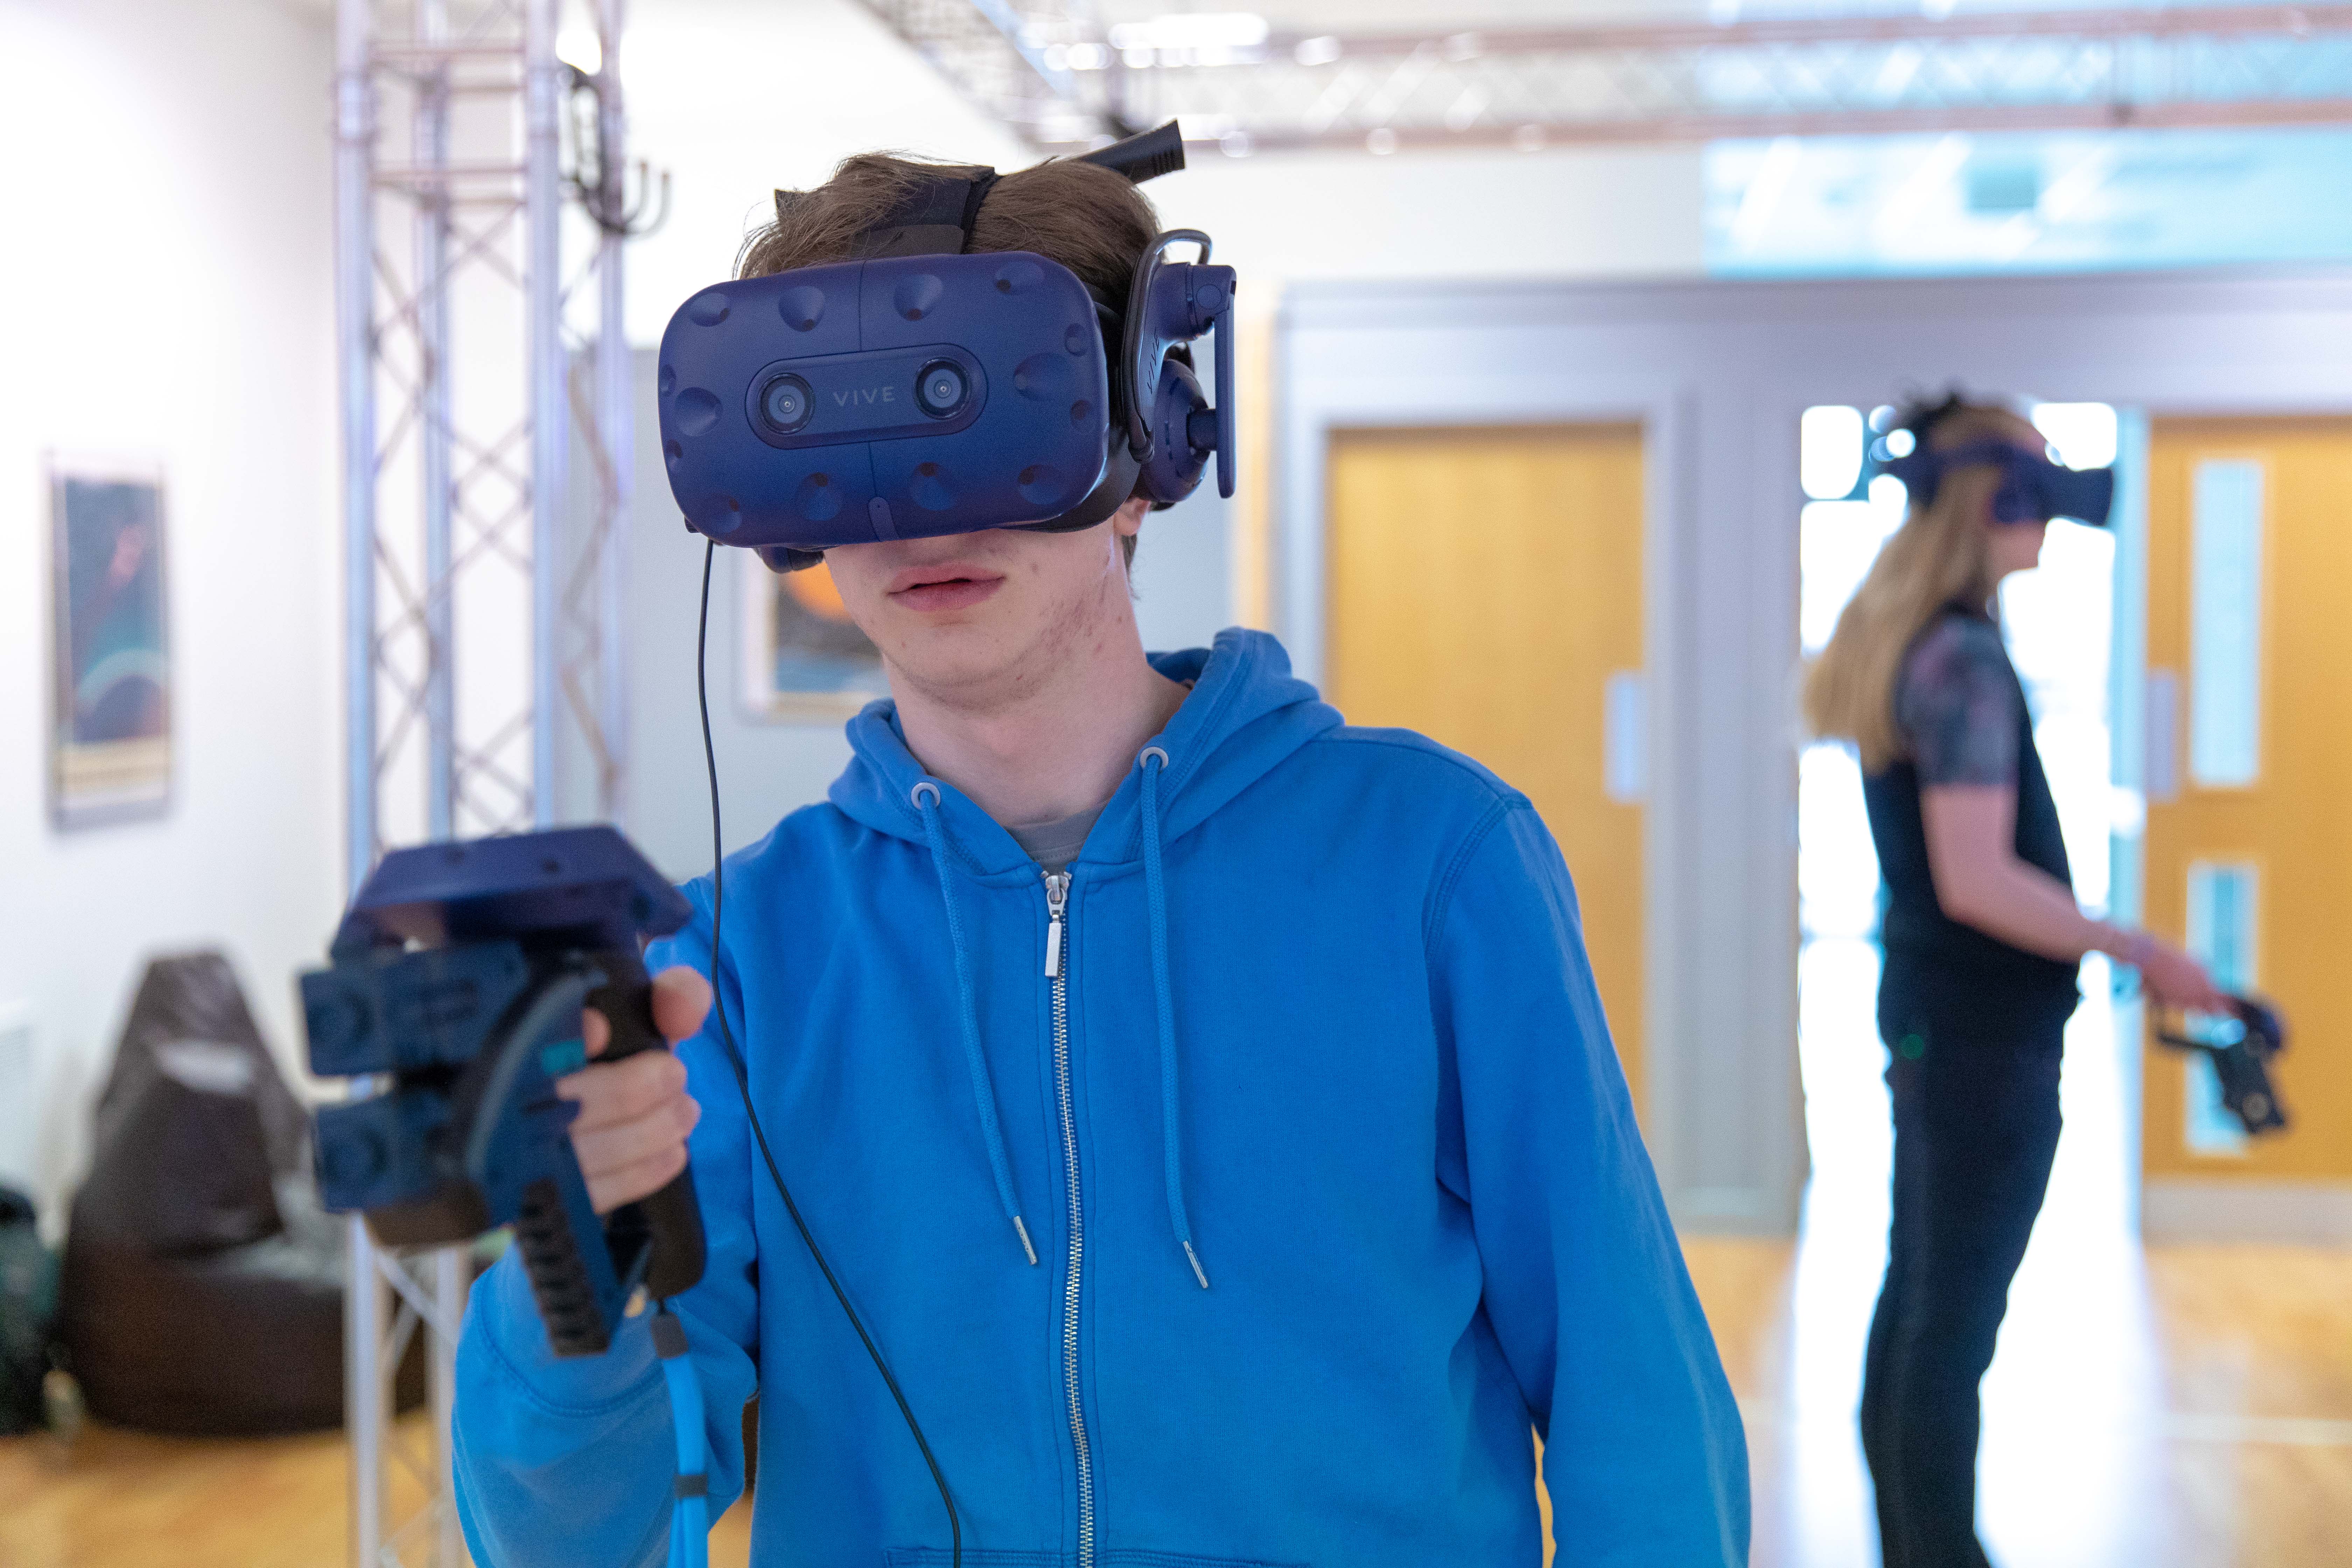 Dogstar VR has opened at Dundee's City Quay